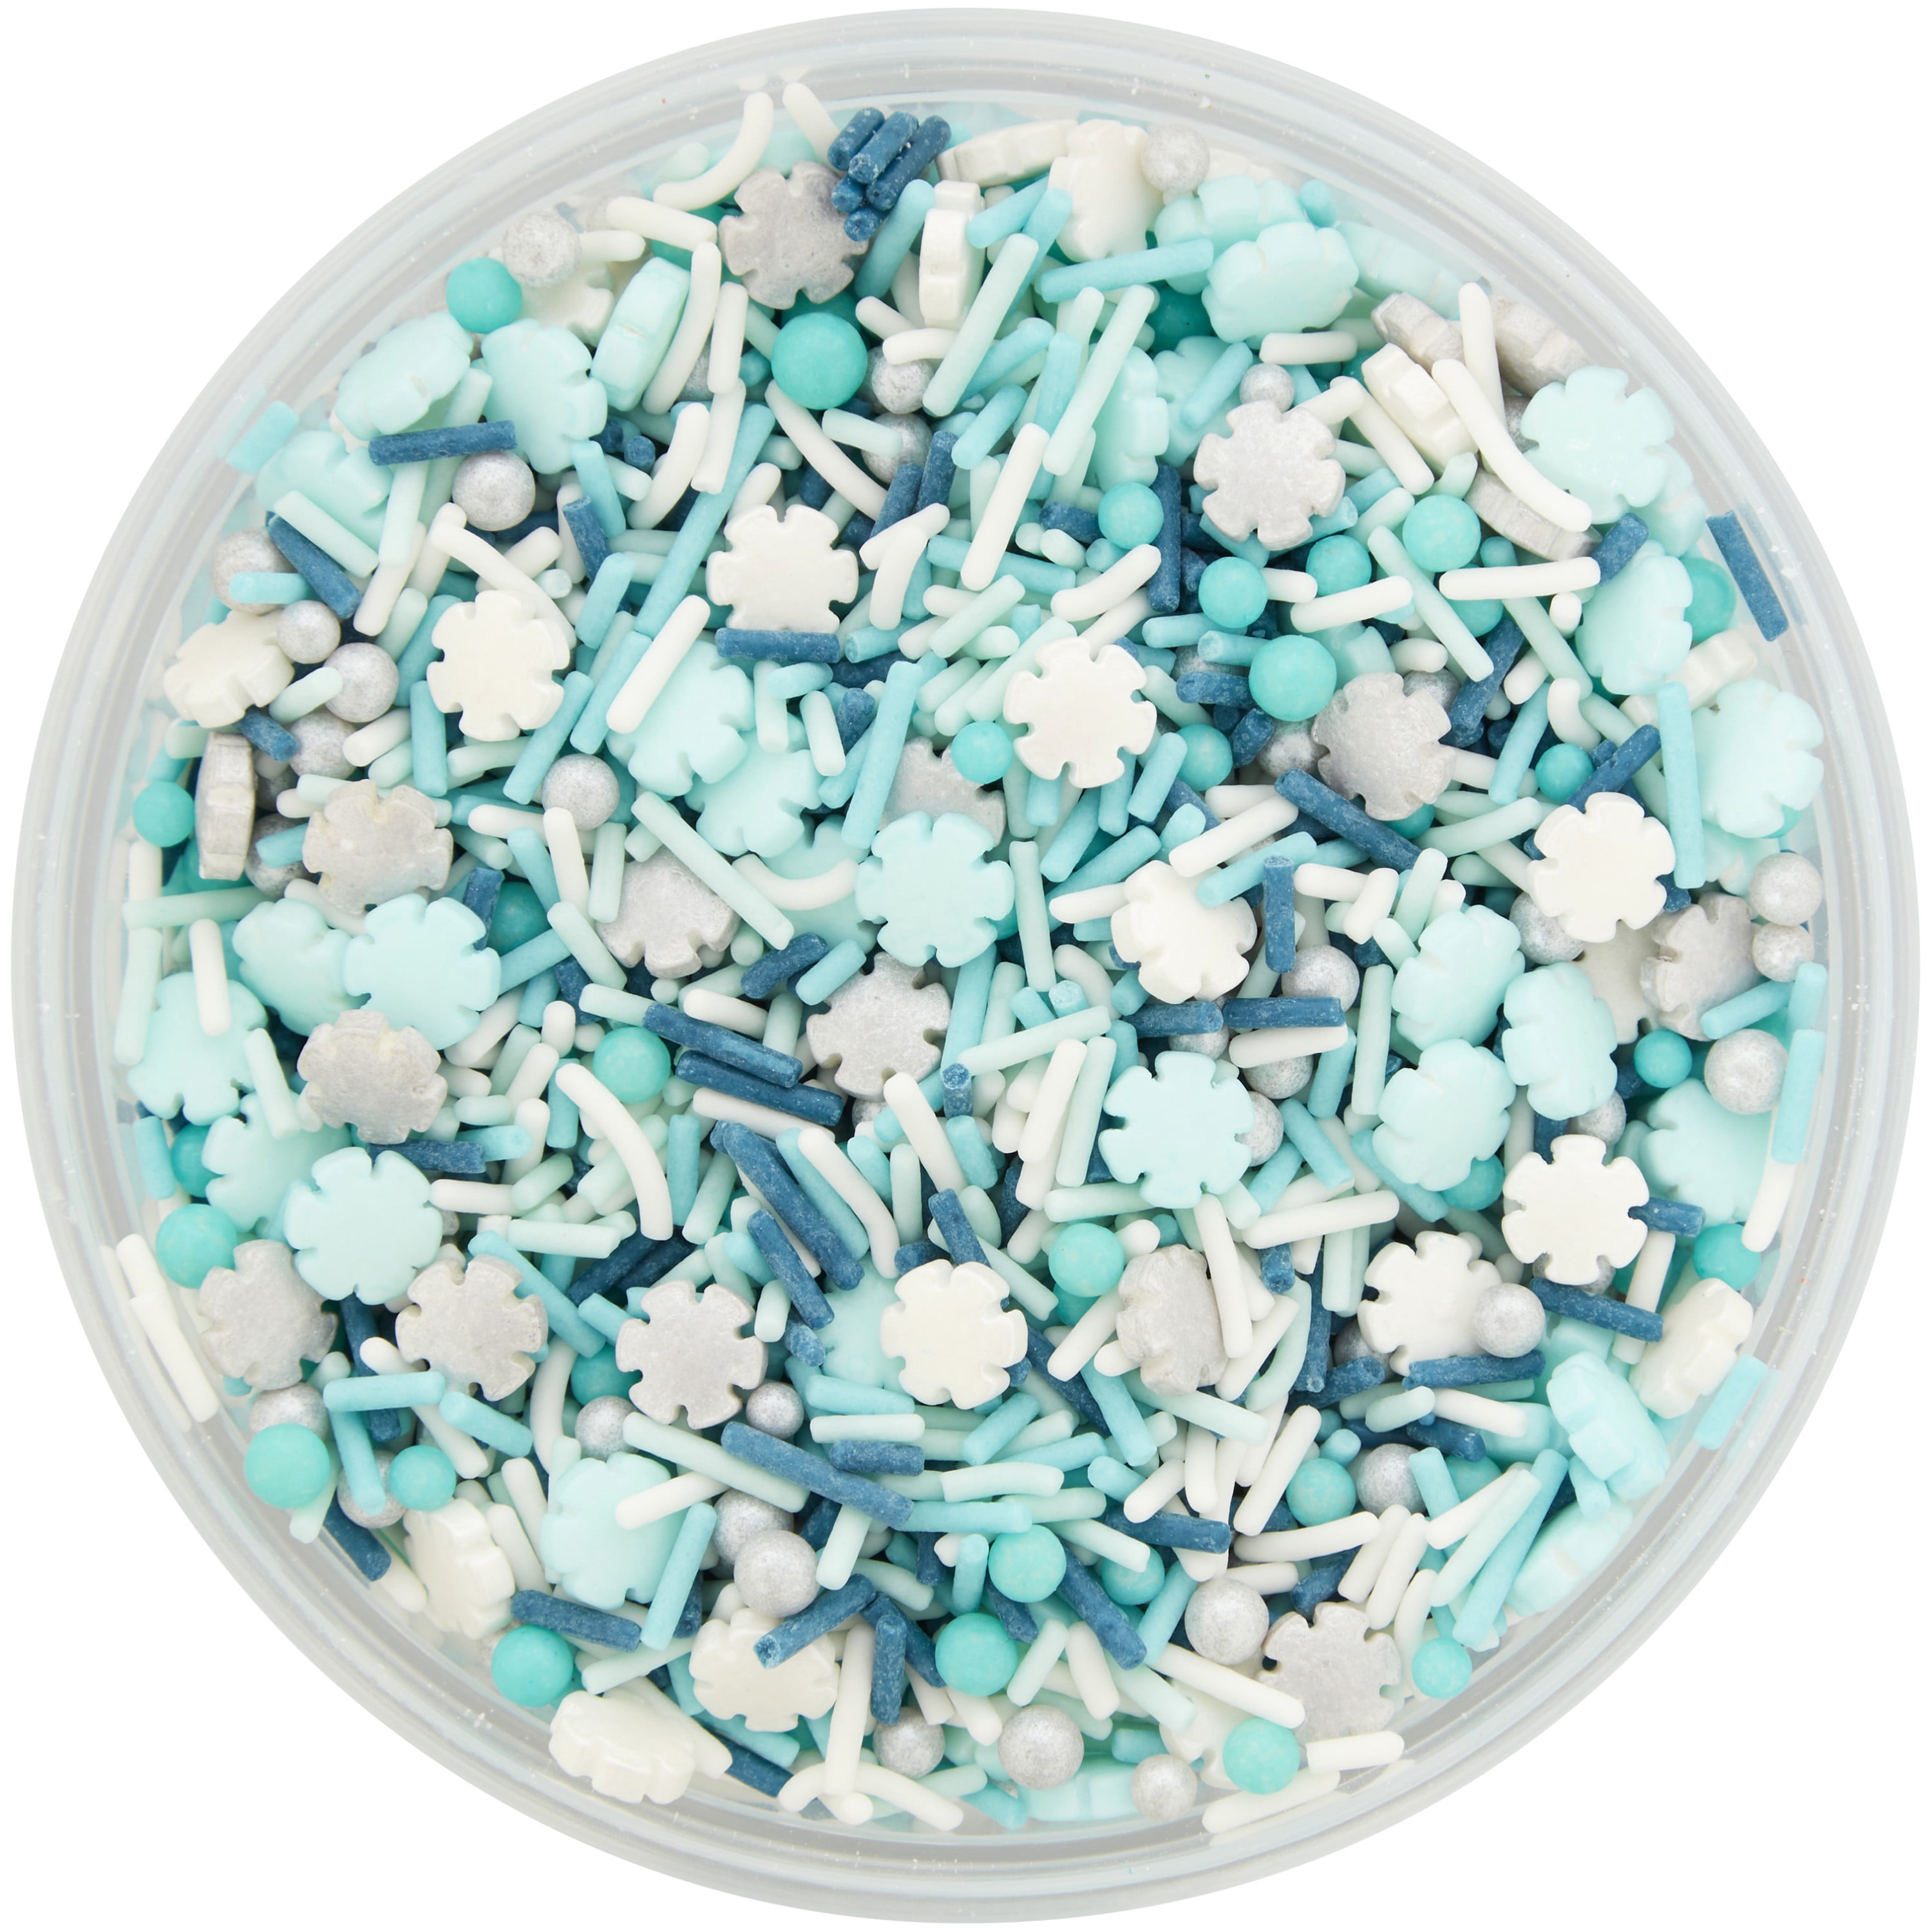 White And Blue Snowflake Sprinkles by Stocksy Contributor Pixel